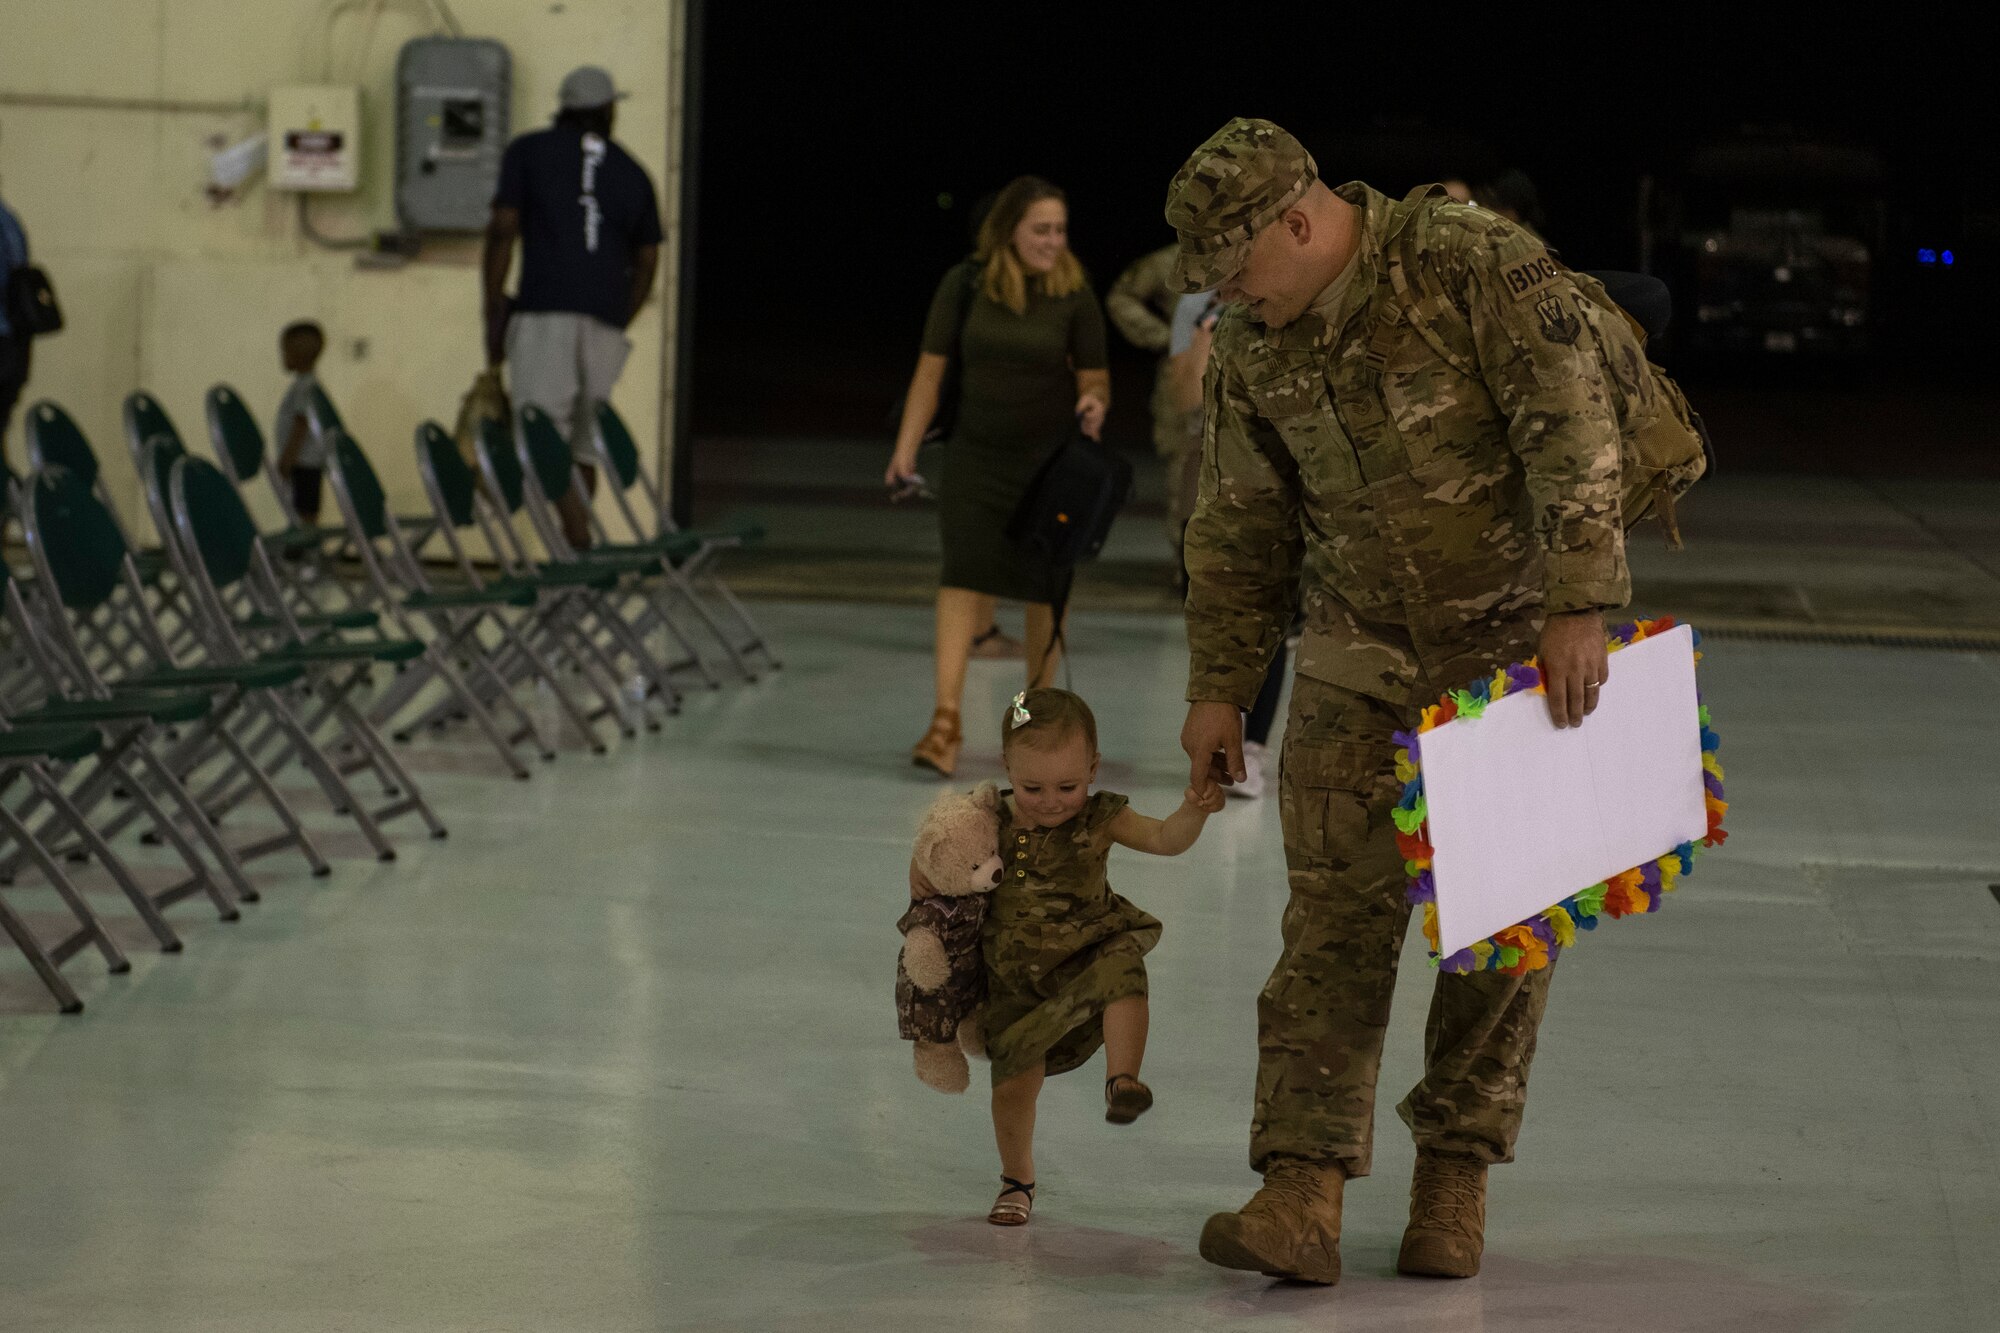 Airman walks with young daughter